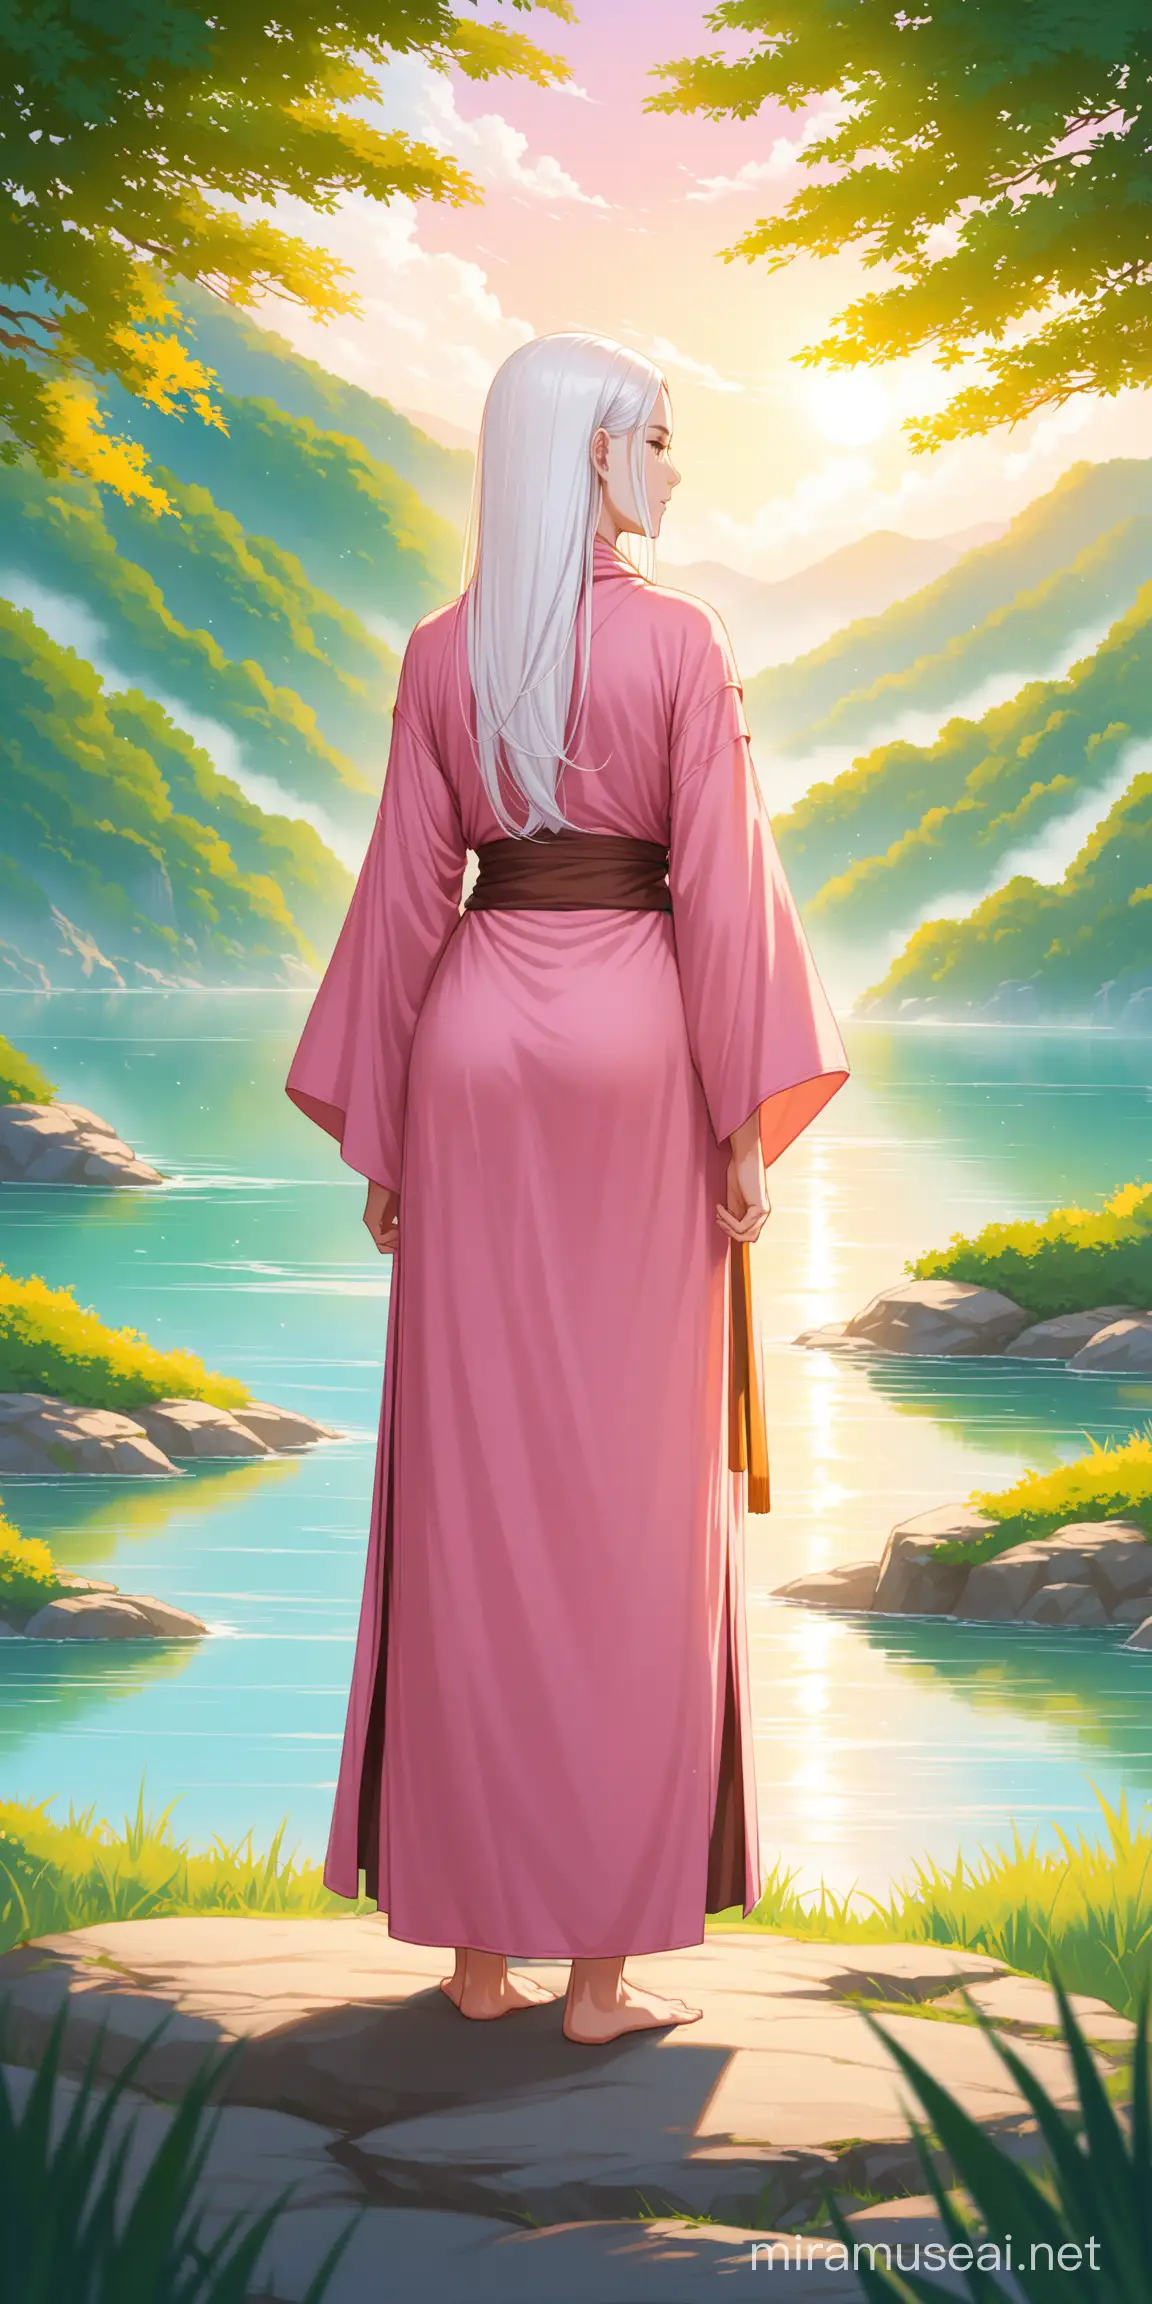 Female, calm, warrior monk, white and pink robe, white hair, standing, long hair, nature background